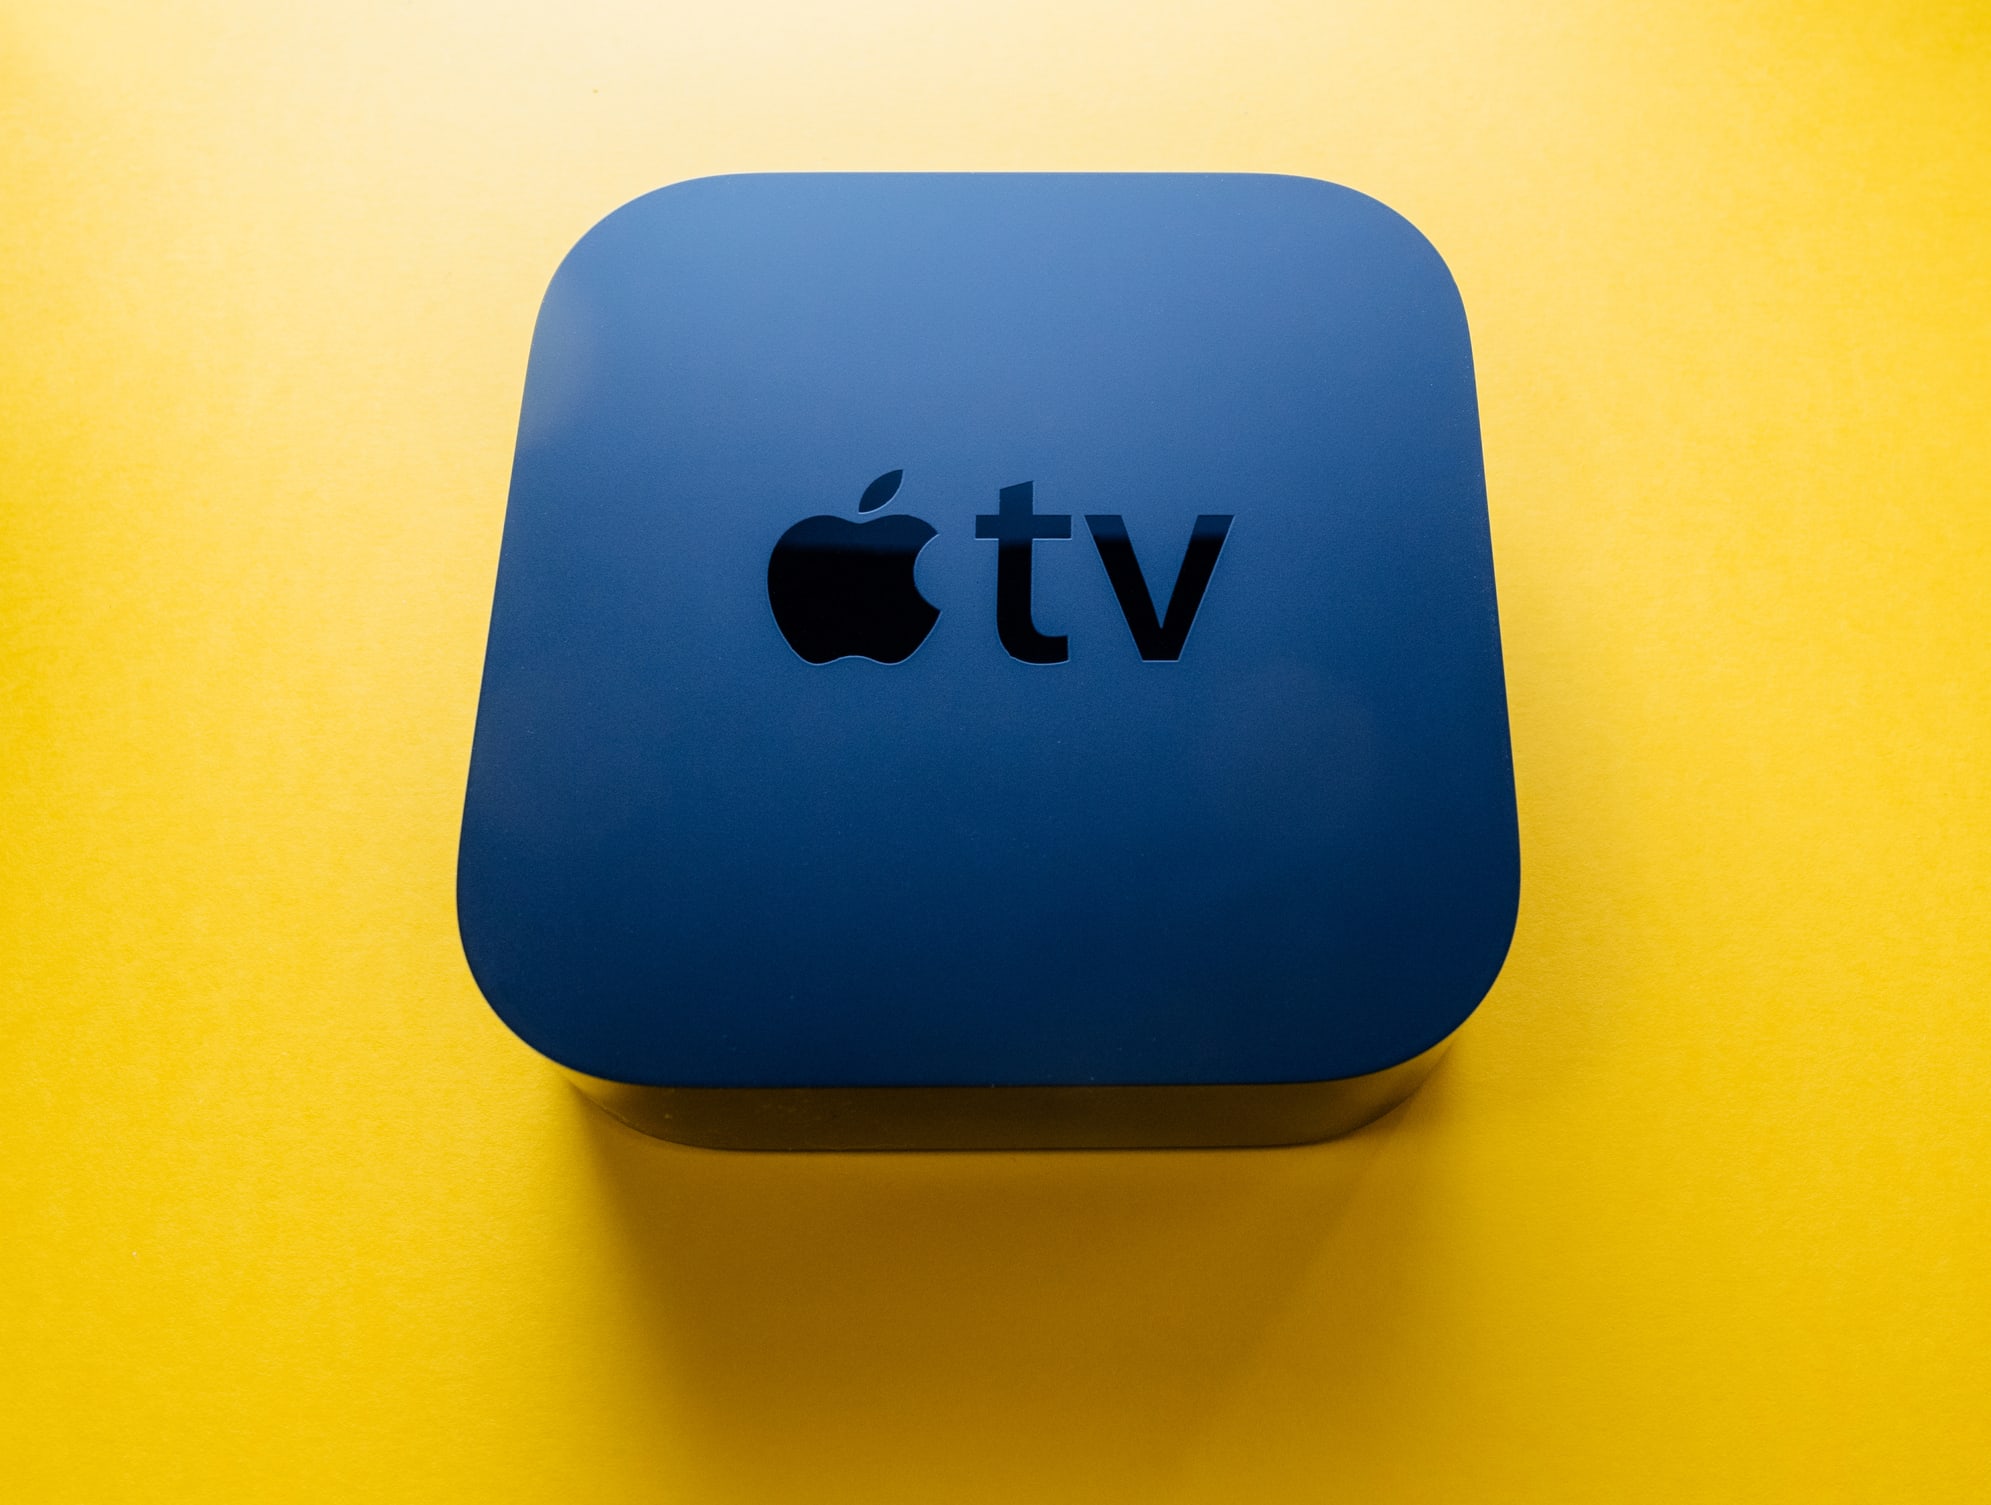 New Apple TV 4k Device Against Yellow Background